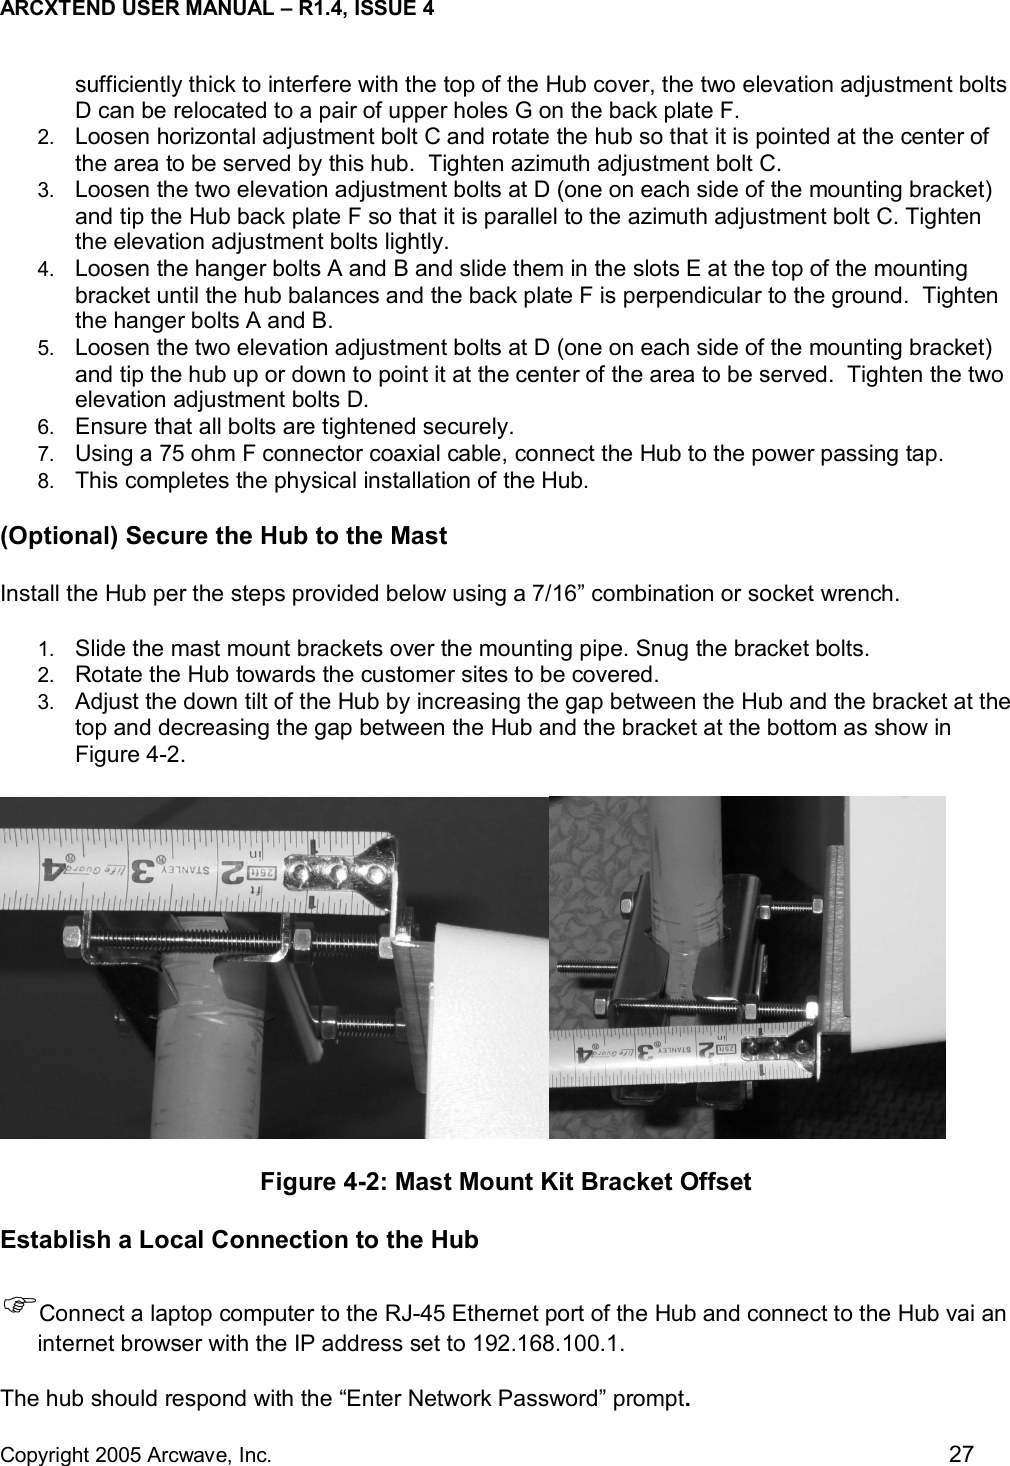 ARCXTEND USER MANUAL – R1.4, ISSUE 4  Copyright 2005 Arcwave, Inc.    27 sufficiently thick to interfere with the top of the Hub cover, the two elevation adjustment bolts D can be relocated to a pair of upper holes G on the back plate F. 2.  Loosen horizontal adjustment bolt C and rotate the hub so that it is pointed at the center of the area to be served by this hub.  Tighten azimuth adjustment bolt C. 3.  Loosen the two elevation adjustment bolts at D (one on each side of the mounting bracket) and tip the Hub back plate F so that it is parallel to the azimuth adjustment bolt C. Tighten the elevation adjustment bolts lightly.  4.  Loosen the hanger bolts A and B and slide them in the slots E at the top of the mounting bracket until the hub balances and the back plate F is perpendicular to the ground.  Tighten the hanger bolts A and B. 5.  Loosen the two elevation adjustment bolts at D (one on each side of the mounting bracket) and tip the hub up or down to point it at the center of the area to be served.  Tighten the two elevation adjustment bolts D. 6.  Ensure that all bolts are tightened securely.  7.  Using a 75 ohm F connector coaxial cable, connect the Hub to the power passing tap.  8.  This completes the physical installation of the Hub. (Optional) Secure the Hub to the Mast  Install the Hub per the steps provided below using a 7/16” combination or socket wrench.  1.  Slide the mast mount brackets over the mounting pipe. Snug the bracket bolts.  2.  Rotate the Hub towards the customer sites to be covered. 3.  Adjust the down tilt of the Hub by increasing the gap between the Hub and the bracket at the top and decreasing the gap between the Hub and the bracket at the bottom as show in Figure 4-2.   Figure 4-2: Mast Mount Kit Bracket Offset Establish a Local Connection to the Hub )Connect a laptop computer to the RJ-45 Ethernet port of the Hub and connect to the Hub vai an internet browser with the IP address set to 192.168.100.1.  The hub should respond with the “Enter Network Password” prompt.  